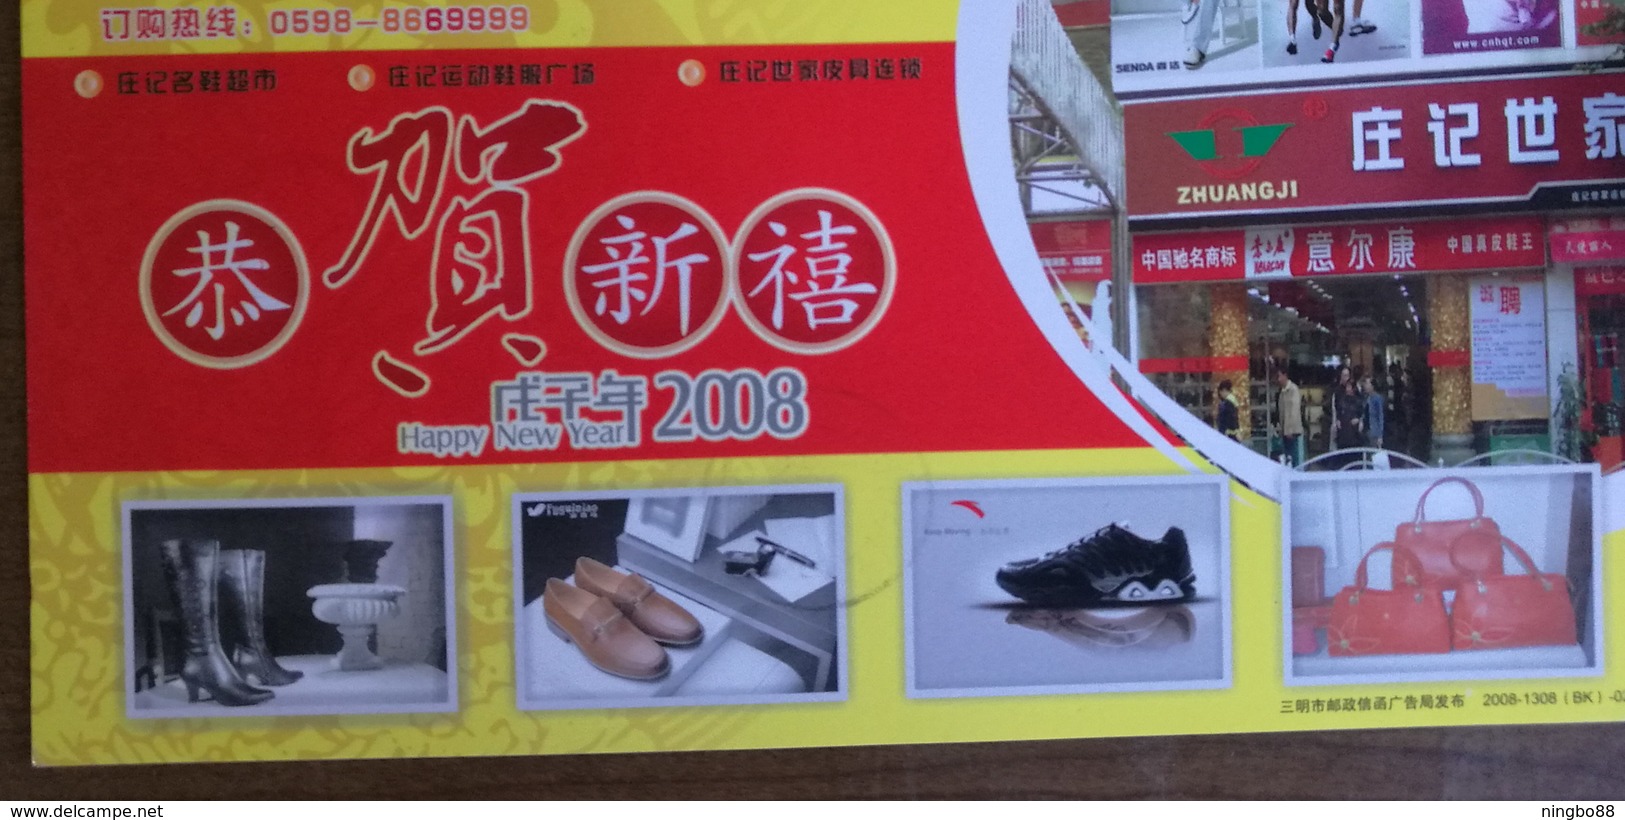 Leather Boots,leather Shoes,Gym Shoes,leather Bags,China 2008 Zhuangji Leathers Chain Store Advert Pre-stamped Card - Factories & Industries